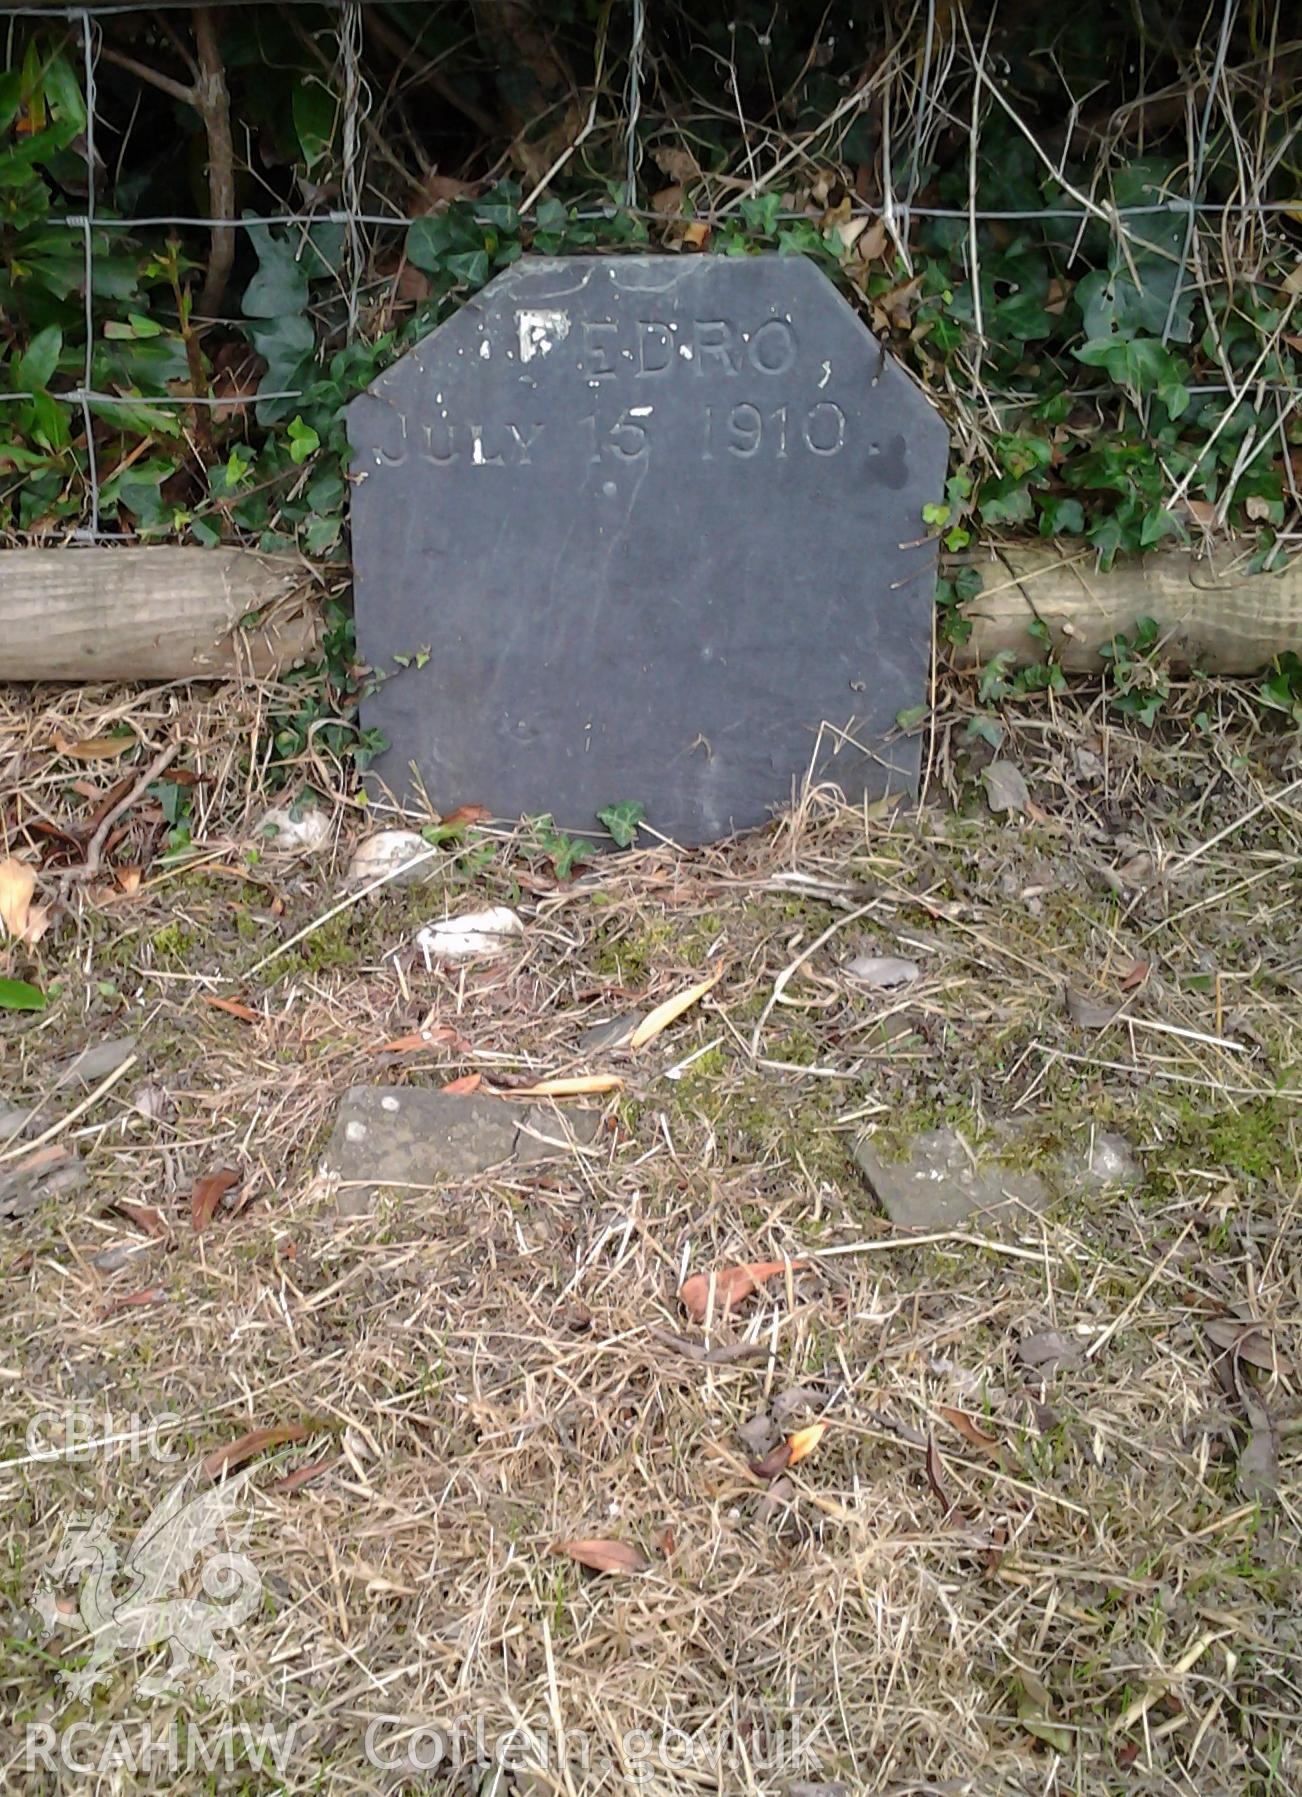 Slate memorial stone to family pet - Pedro July 15 1910 - alongside the outer fence of the churchyard